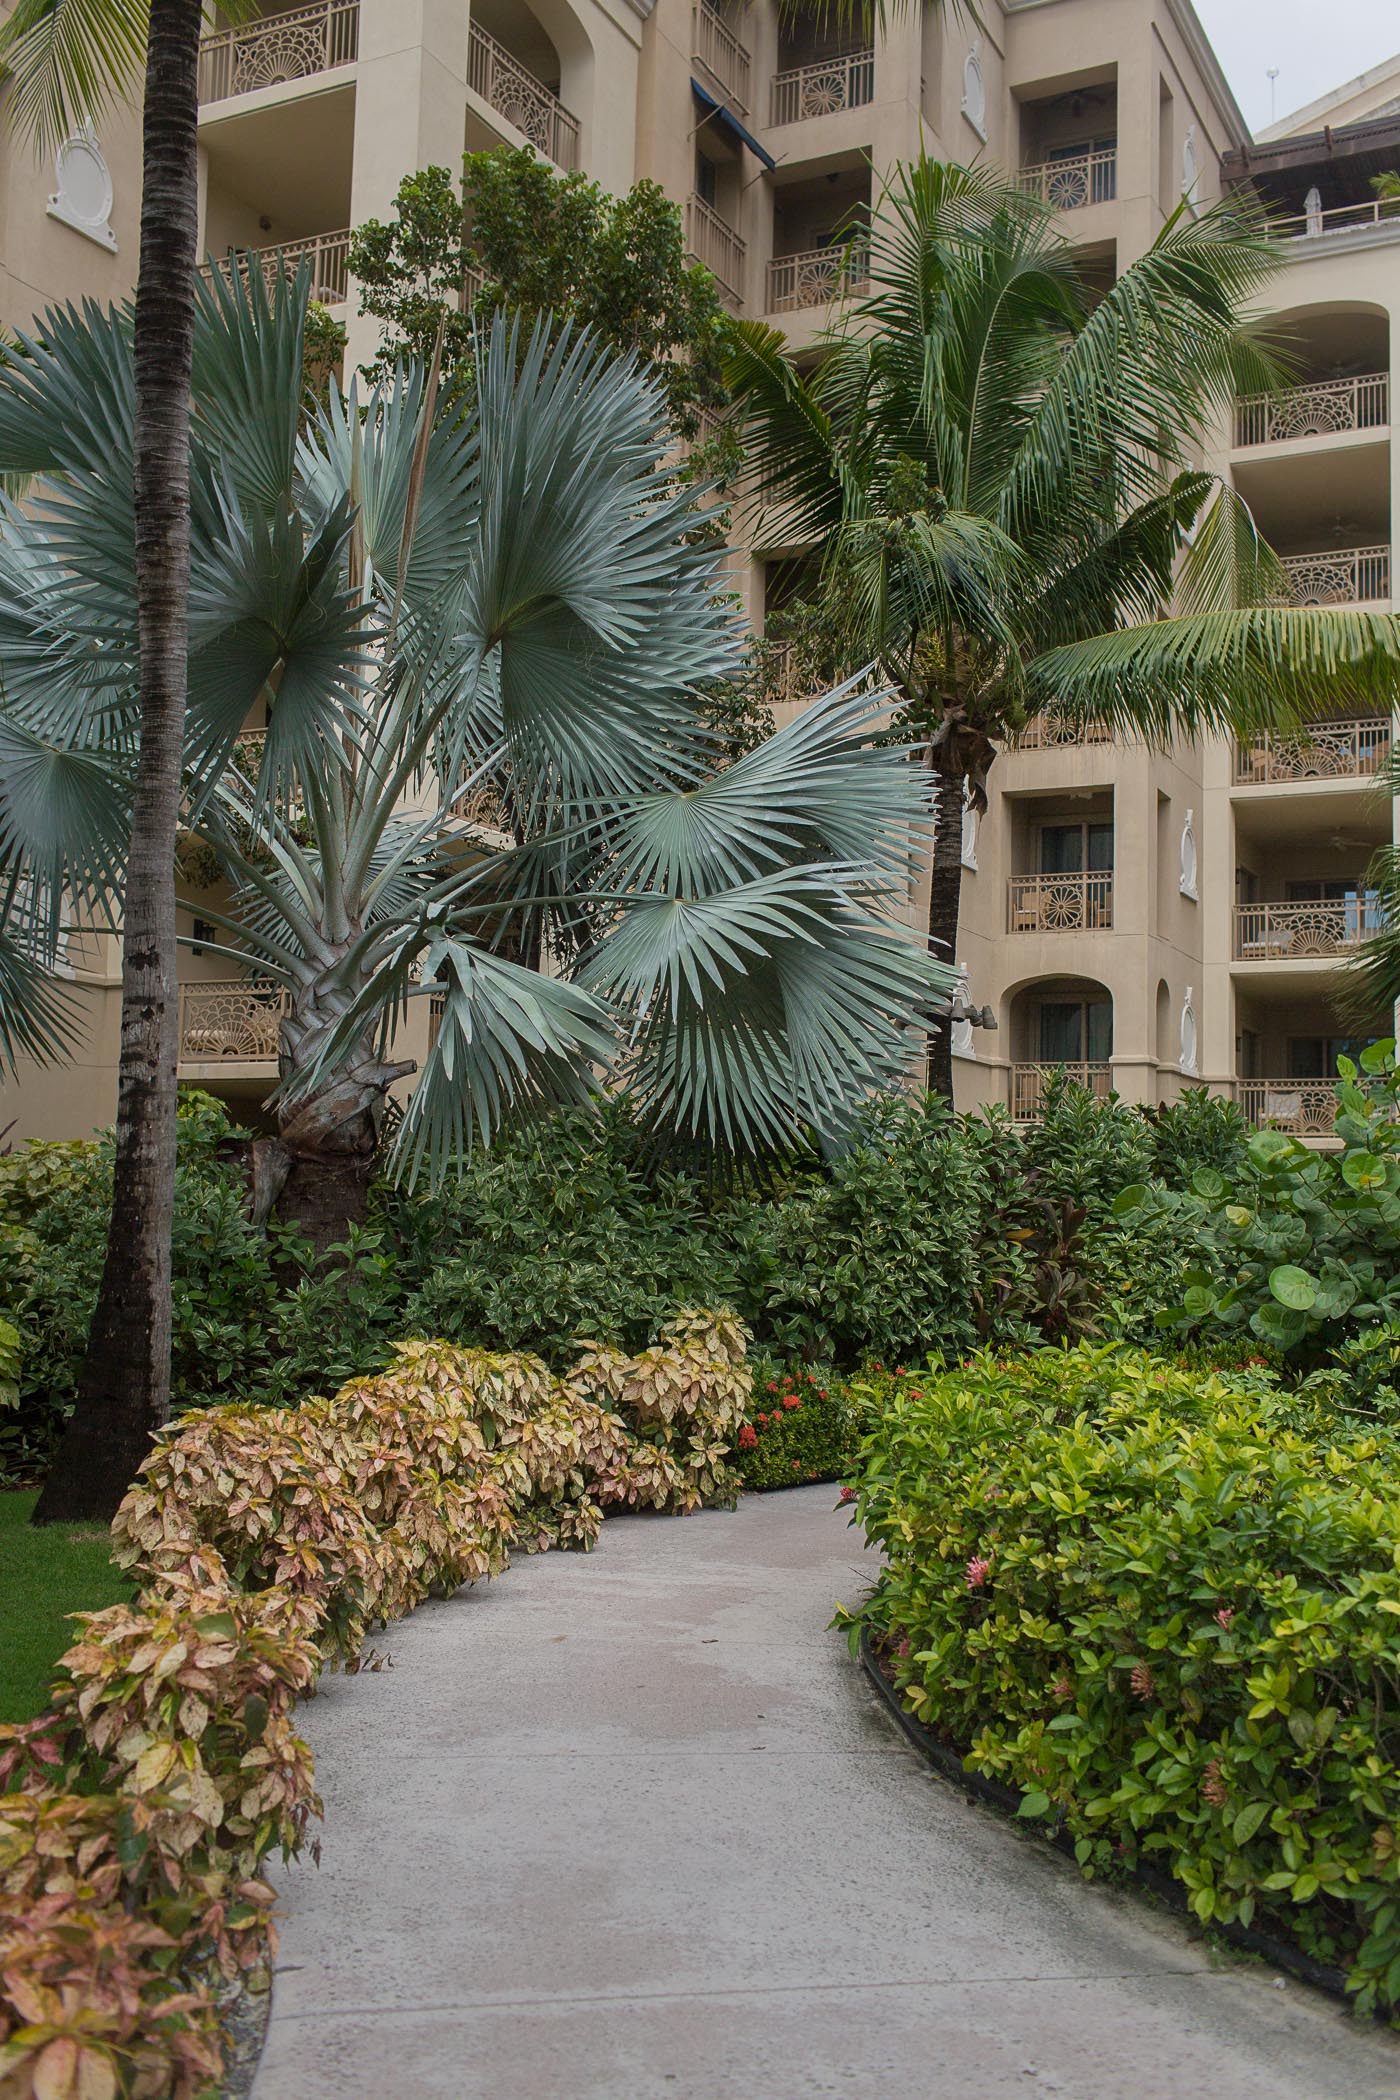 Landscaping at Ritz-Carlton in Grand Cayman